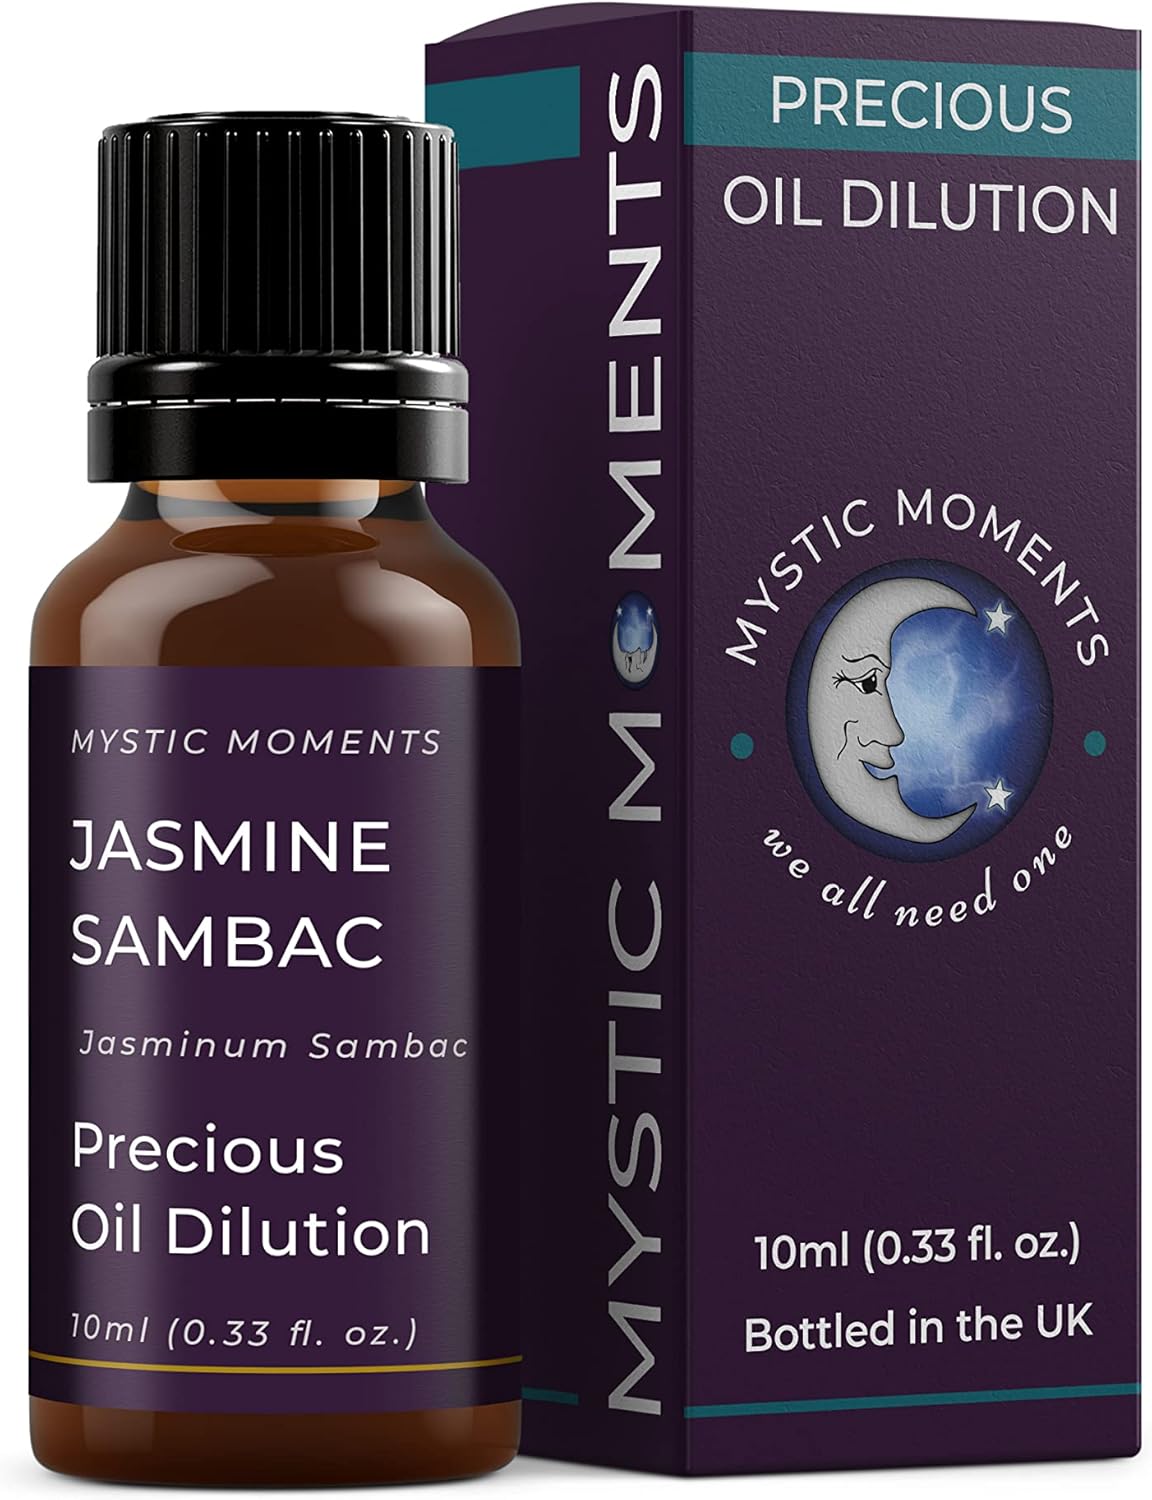 Mystic Moments | Jasmine Sambac Absolute Precious Oil Dilution 10ml 3% Jojoba Blend Perfect for Massage, Skincare, Beauty and Aromatherapy